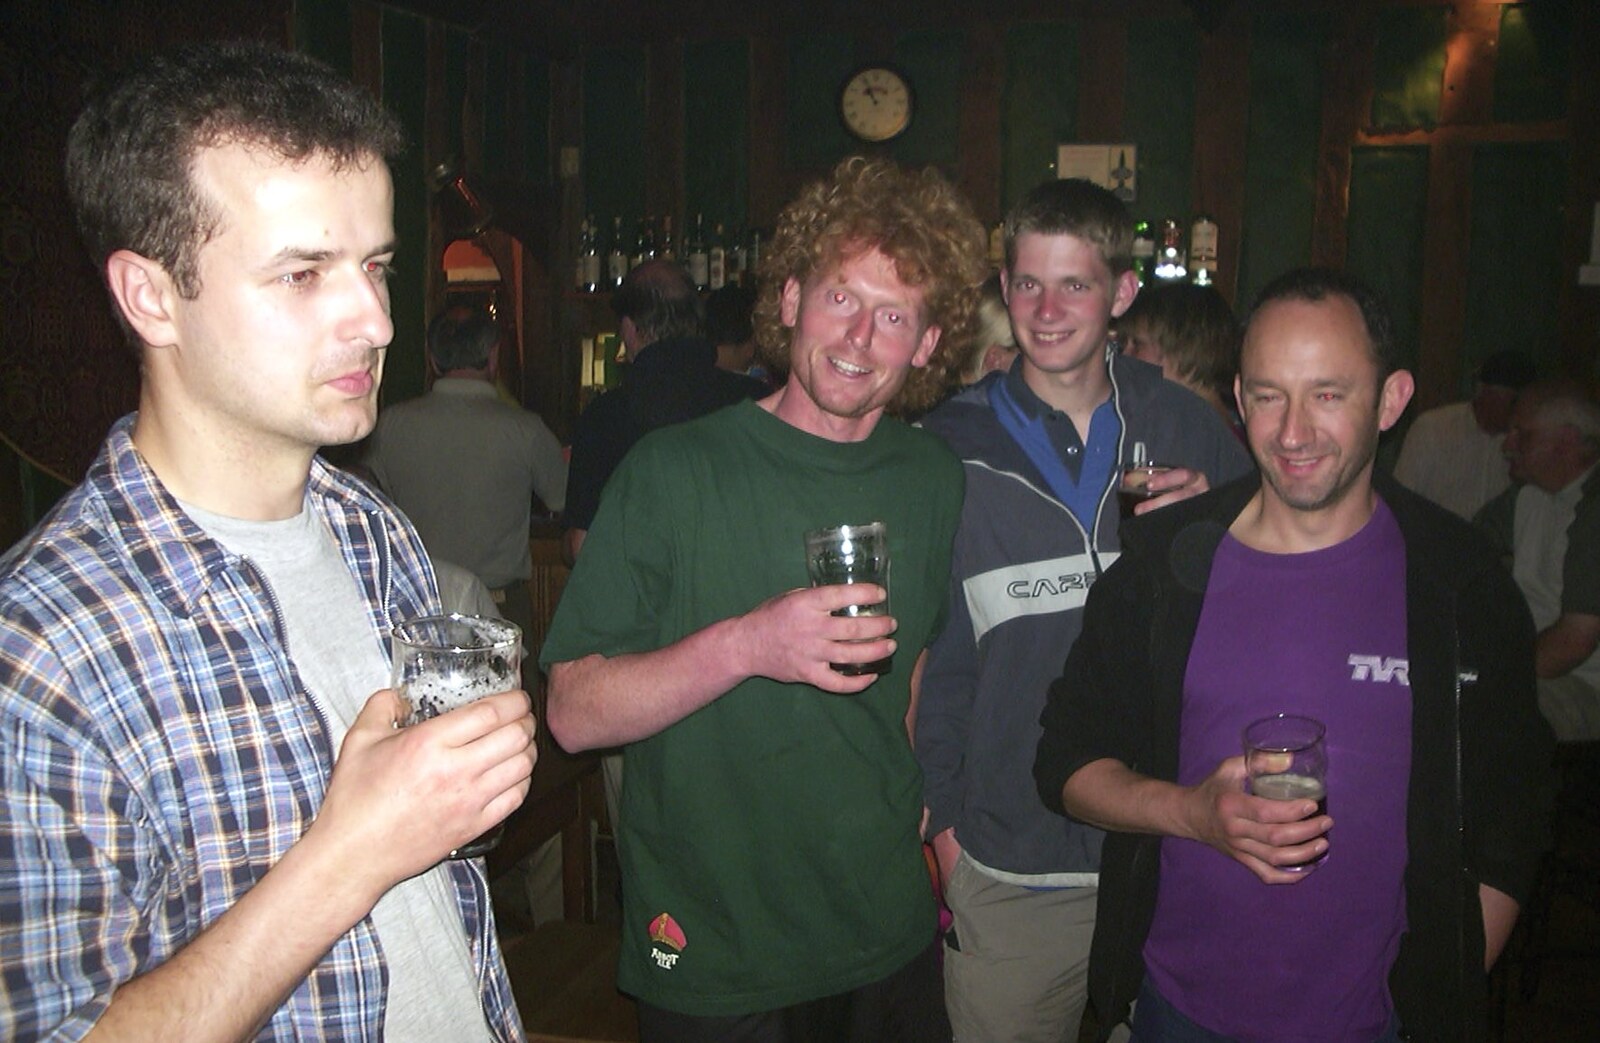 Czech George, Wavy, The Boy Phil and DH from The BSCC at Laxfield and Hoxne, Suffolk - 2nd May 2002